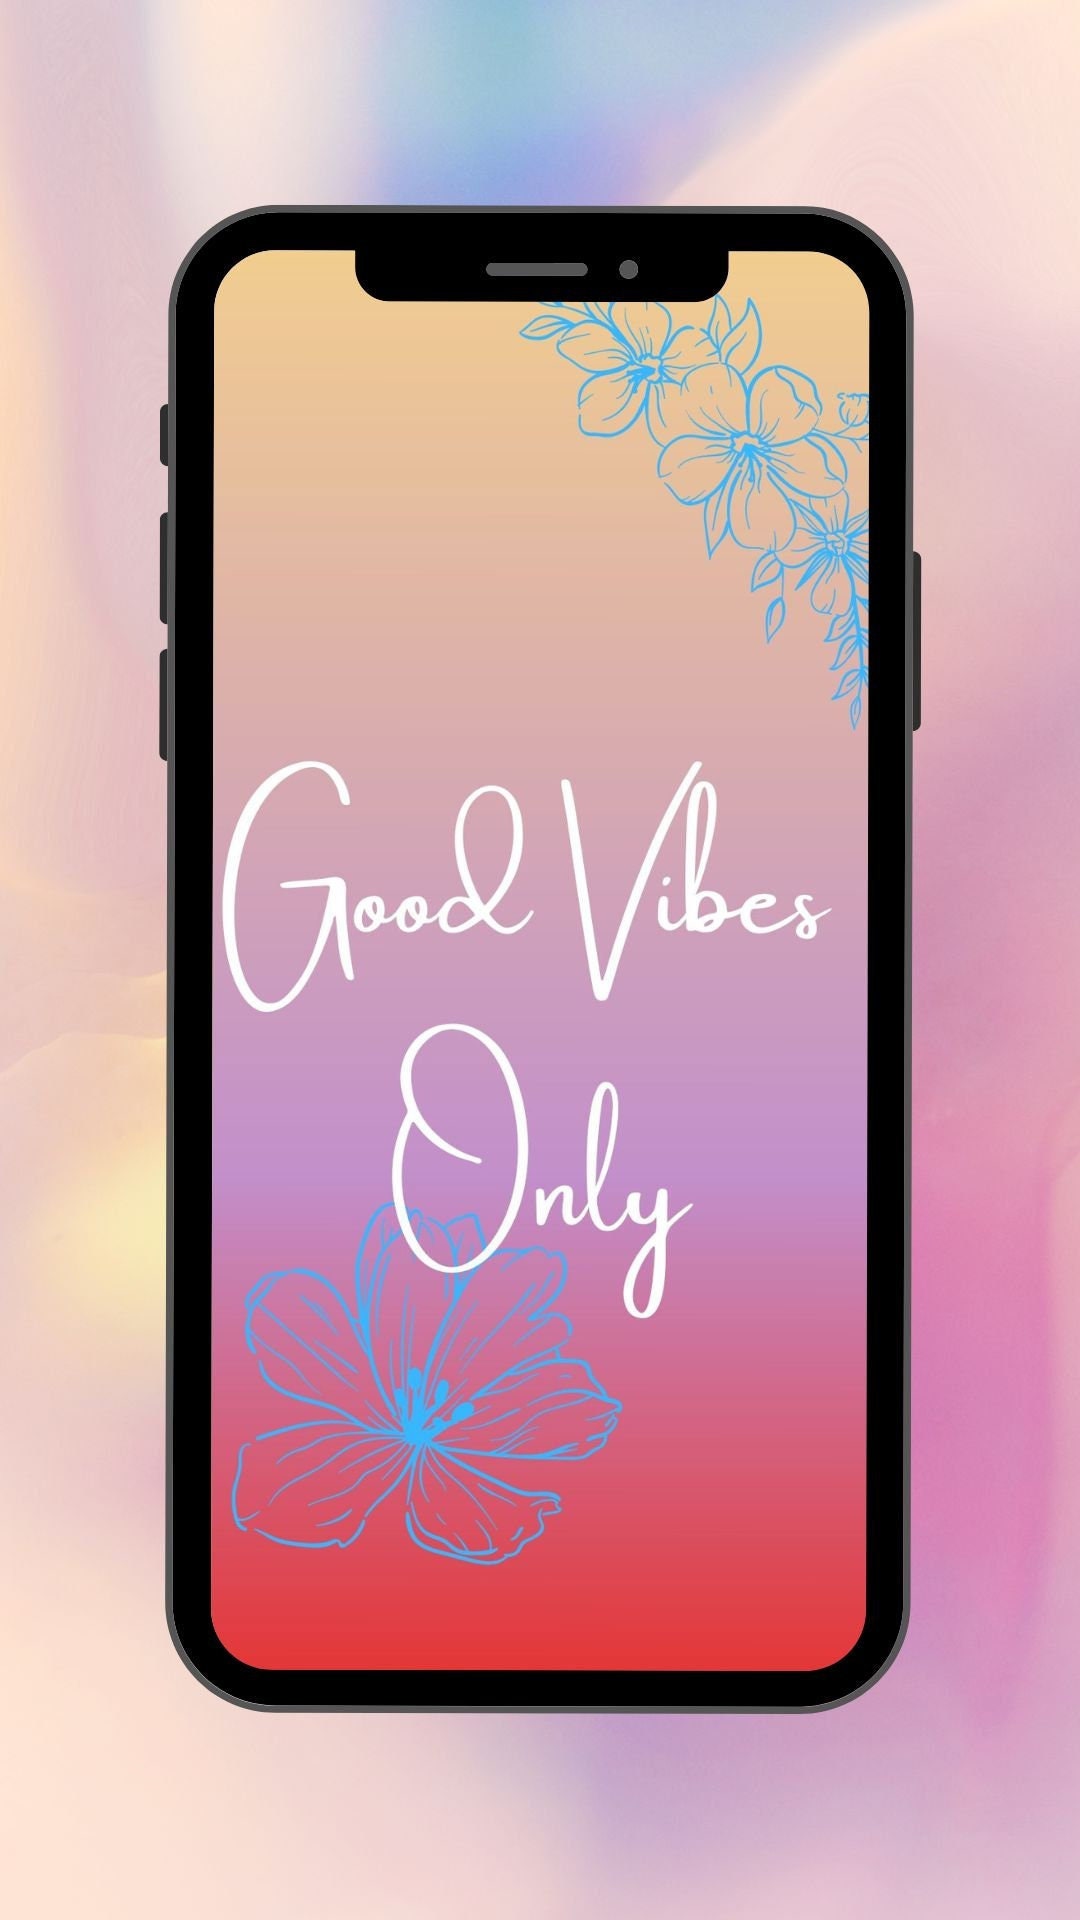 GOOD VIBES ONLY, aesthetic, inspire, positive, HD phone wallpaper